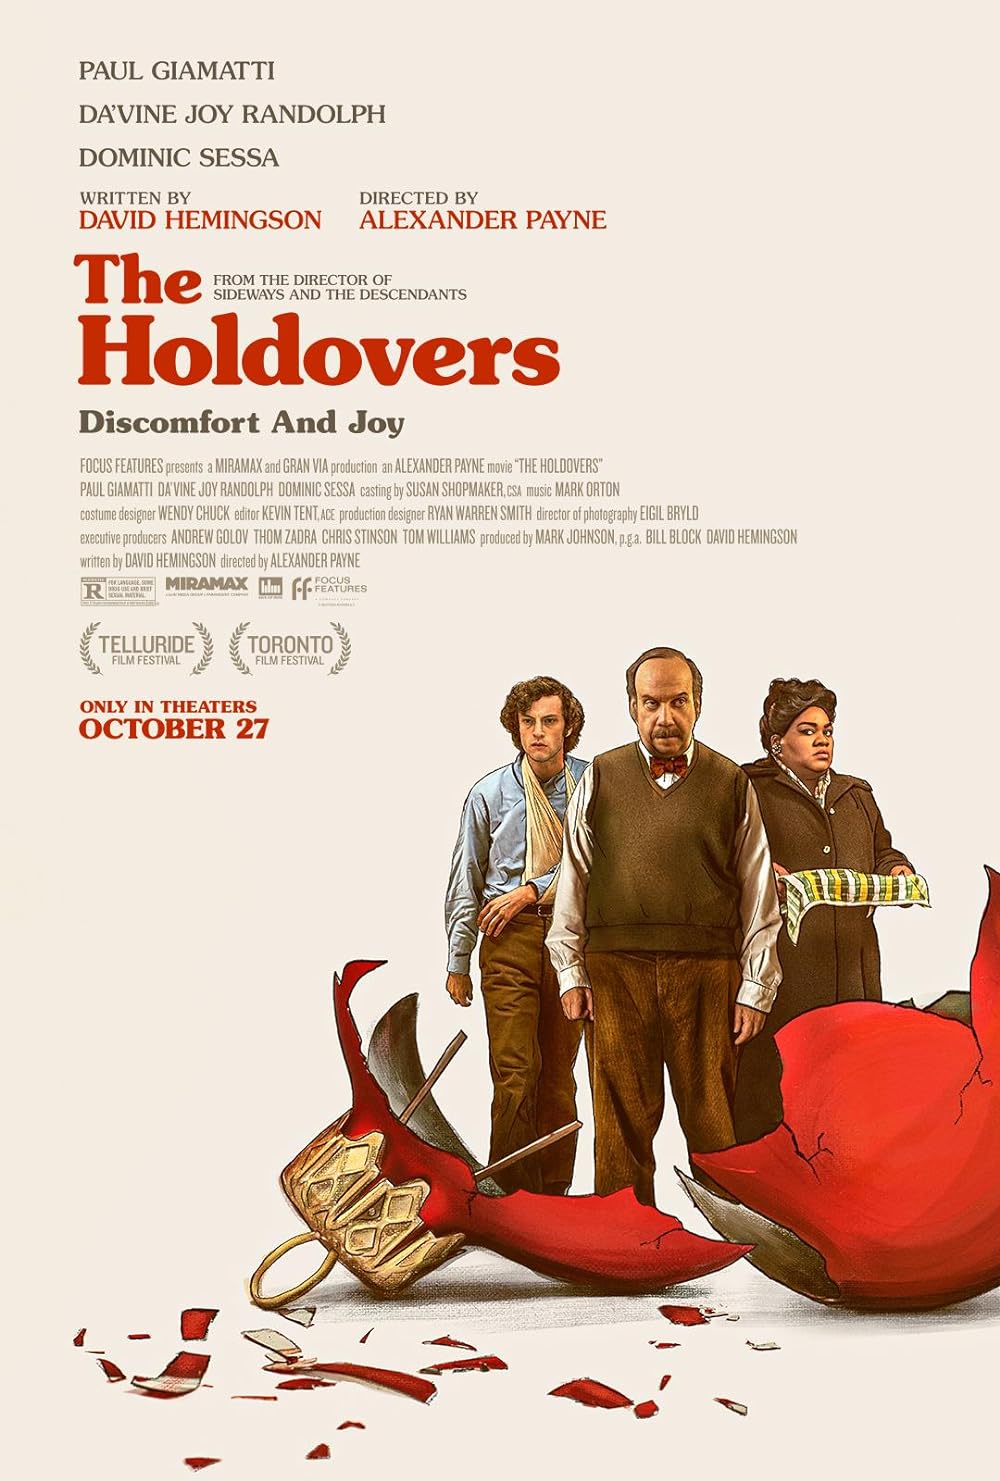 Cover Art for "The Holdovers"